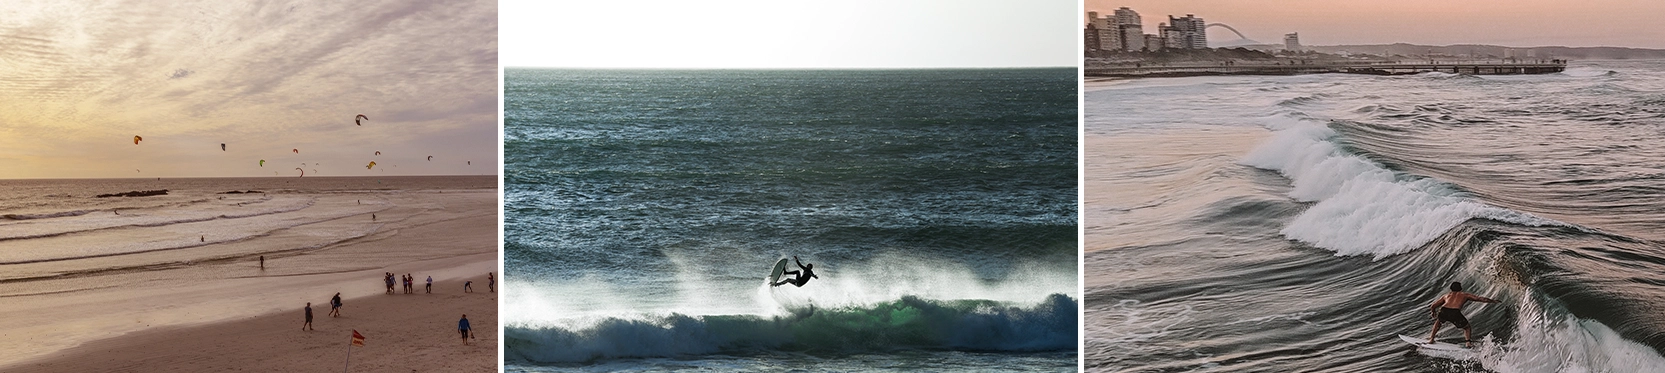 Surfing South Africa